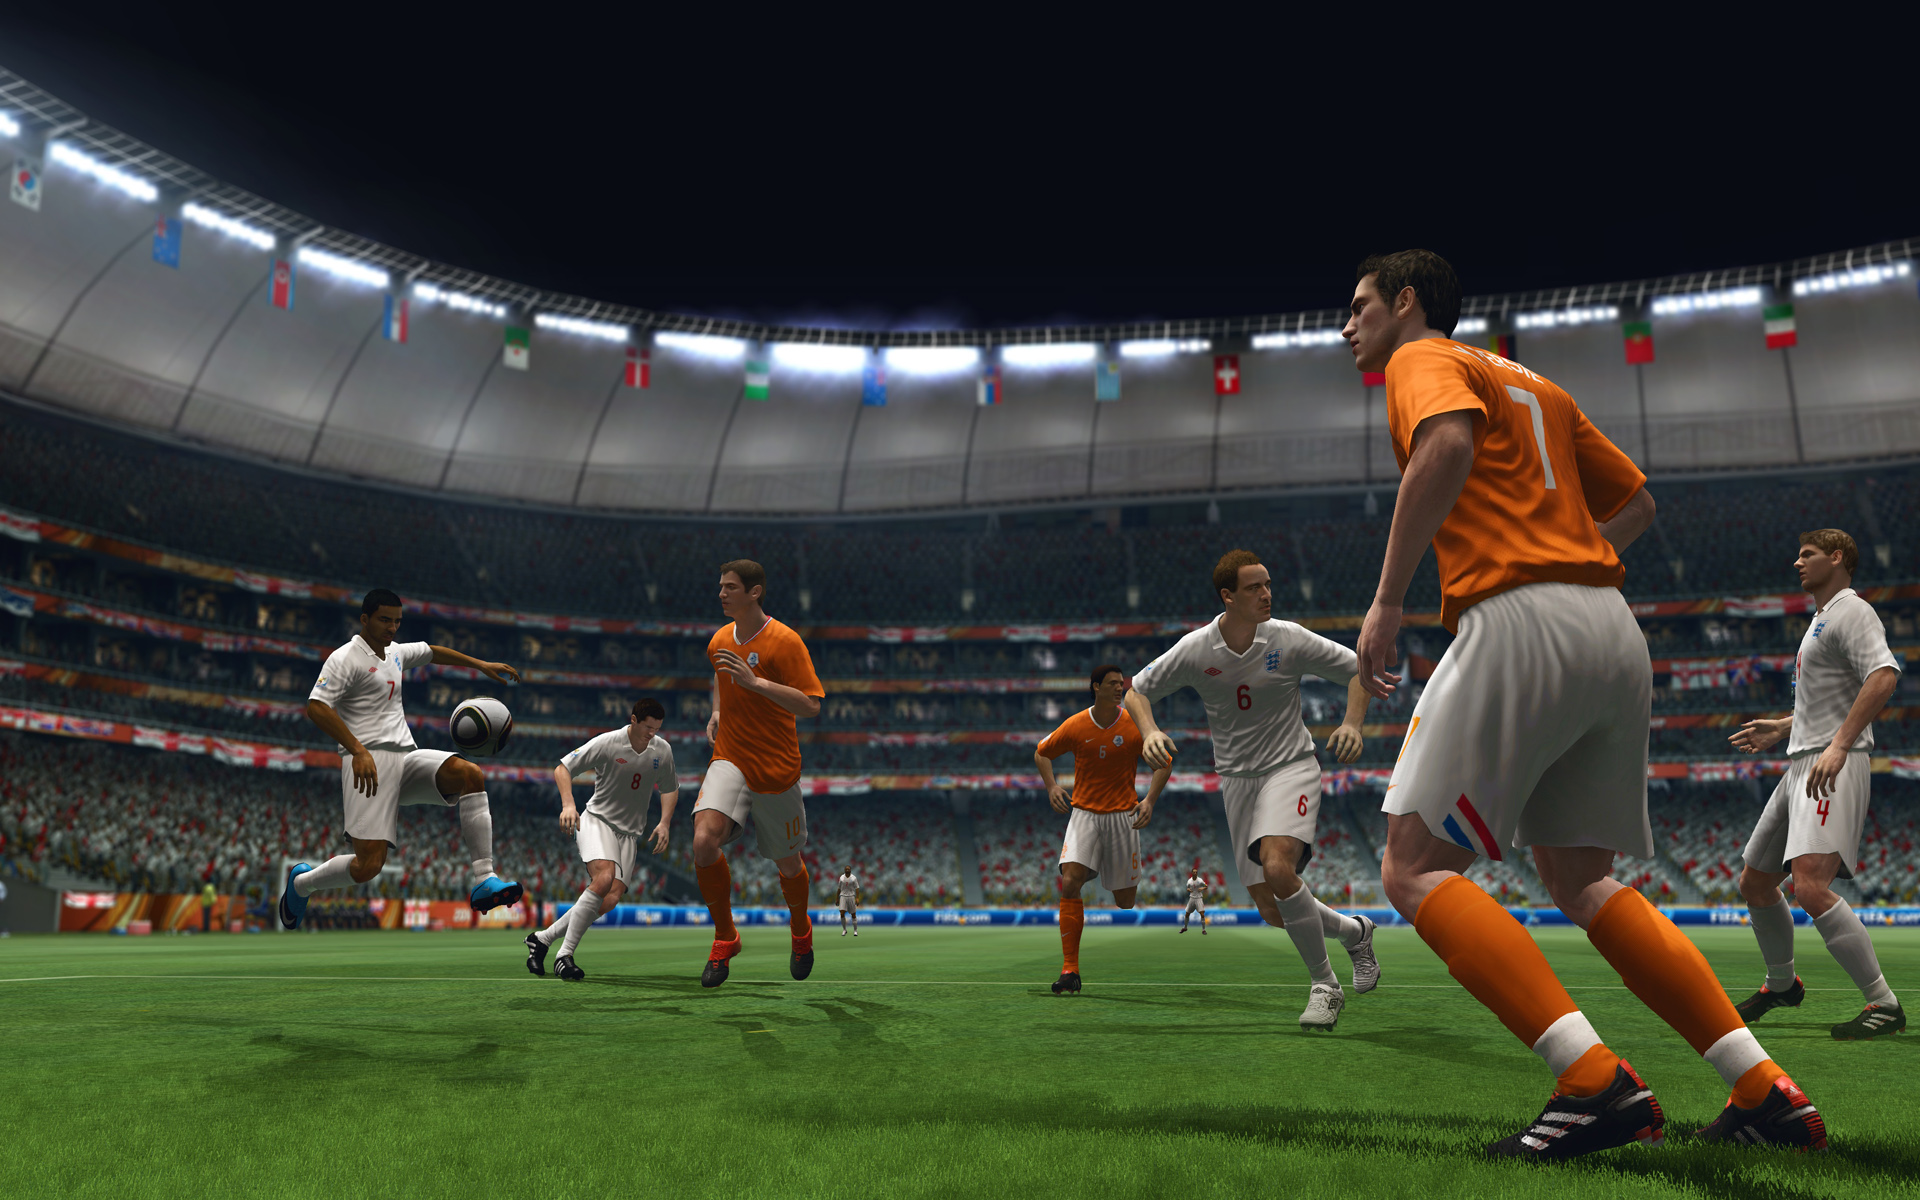 video game, 2010 fifa world cup south africa